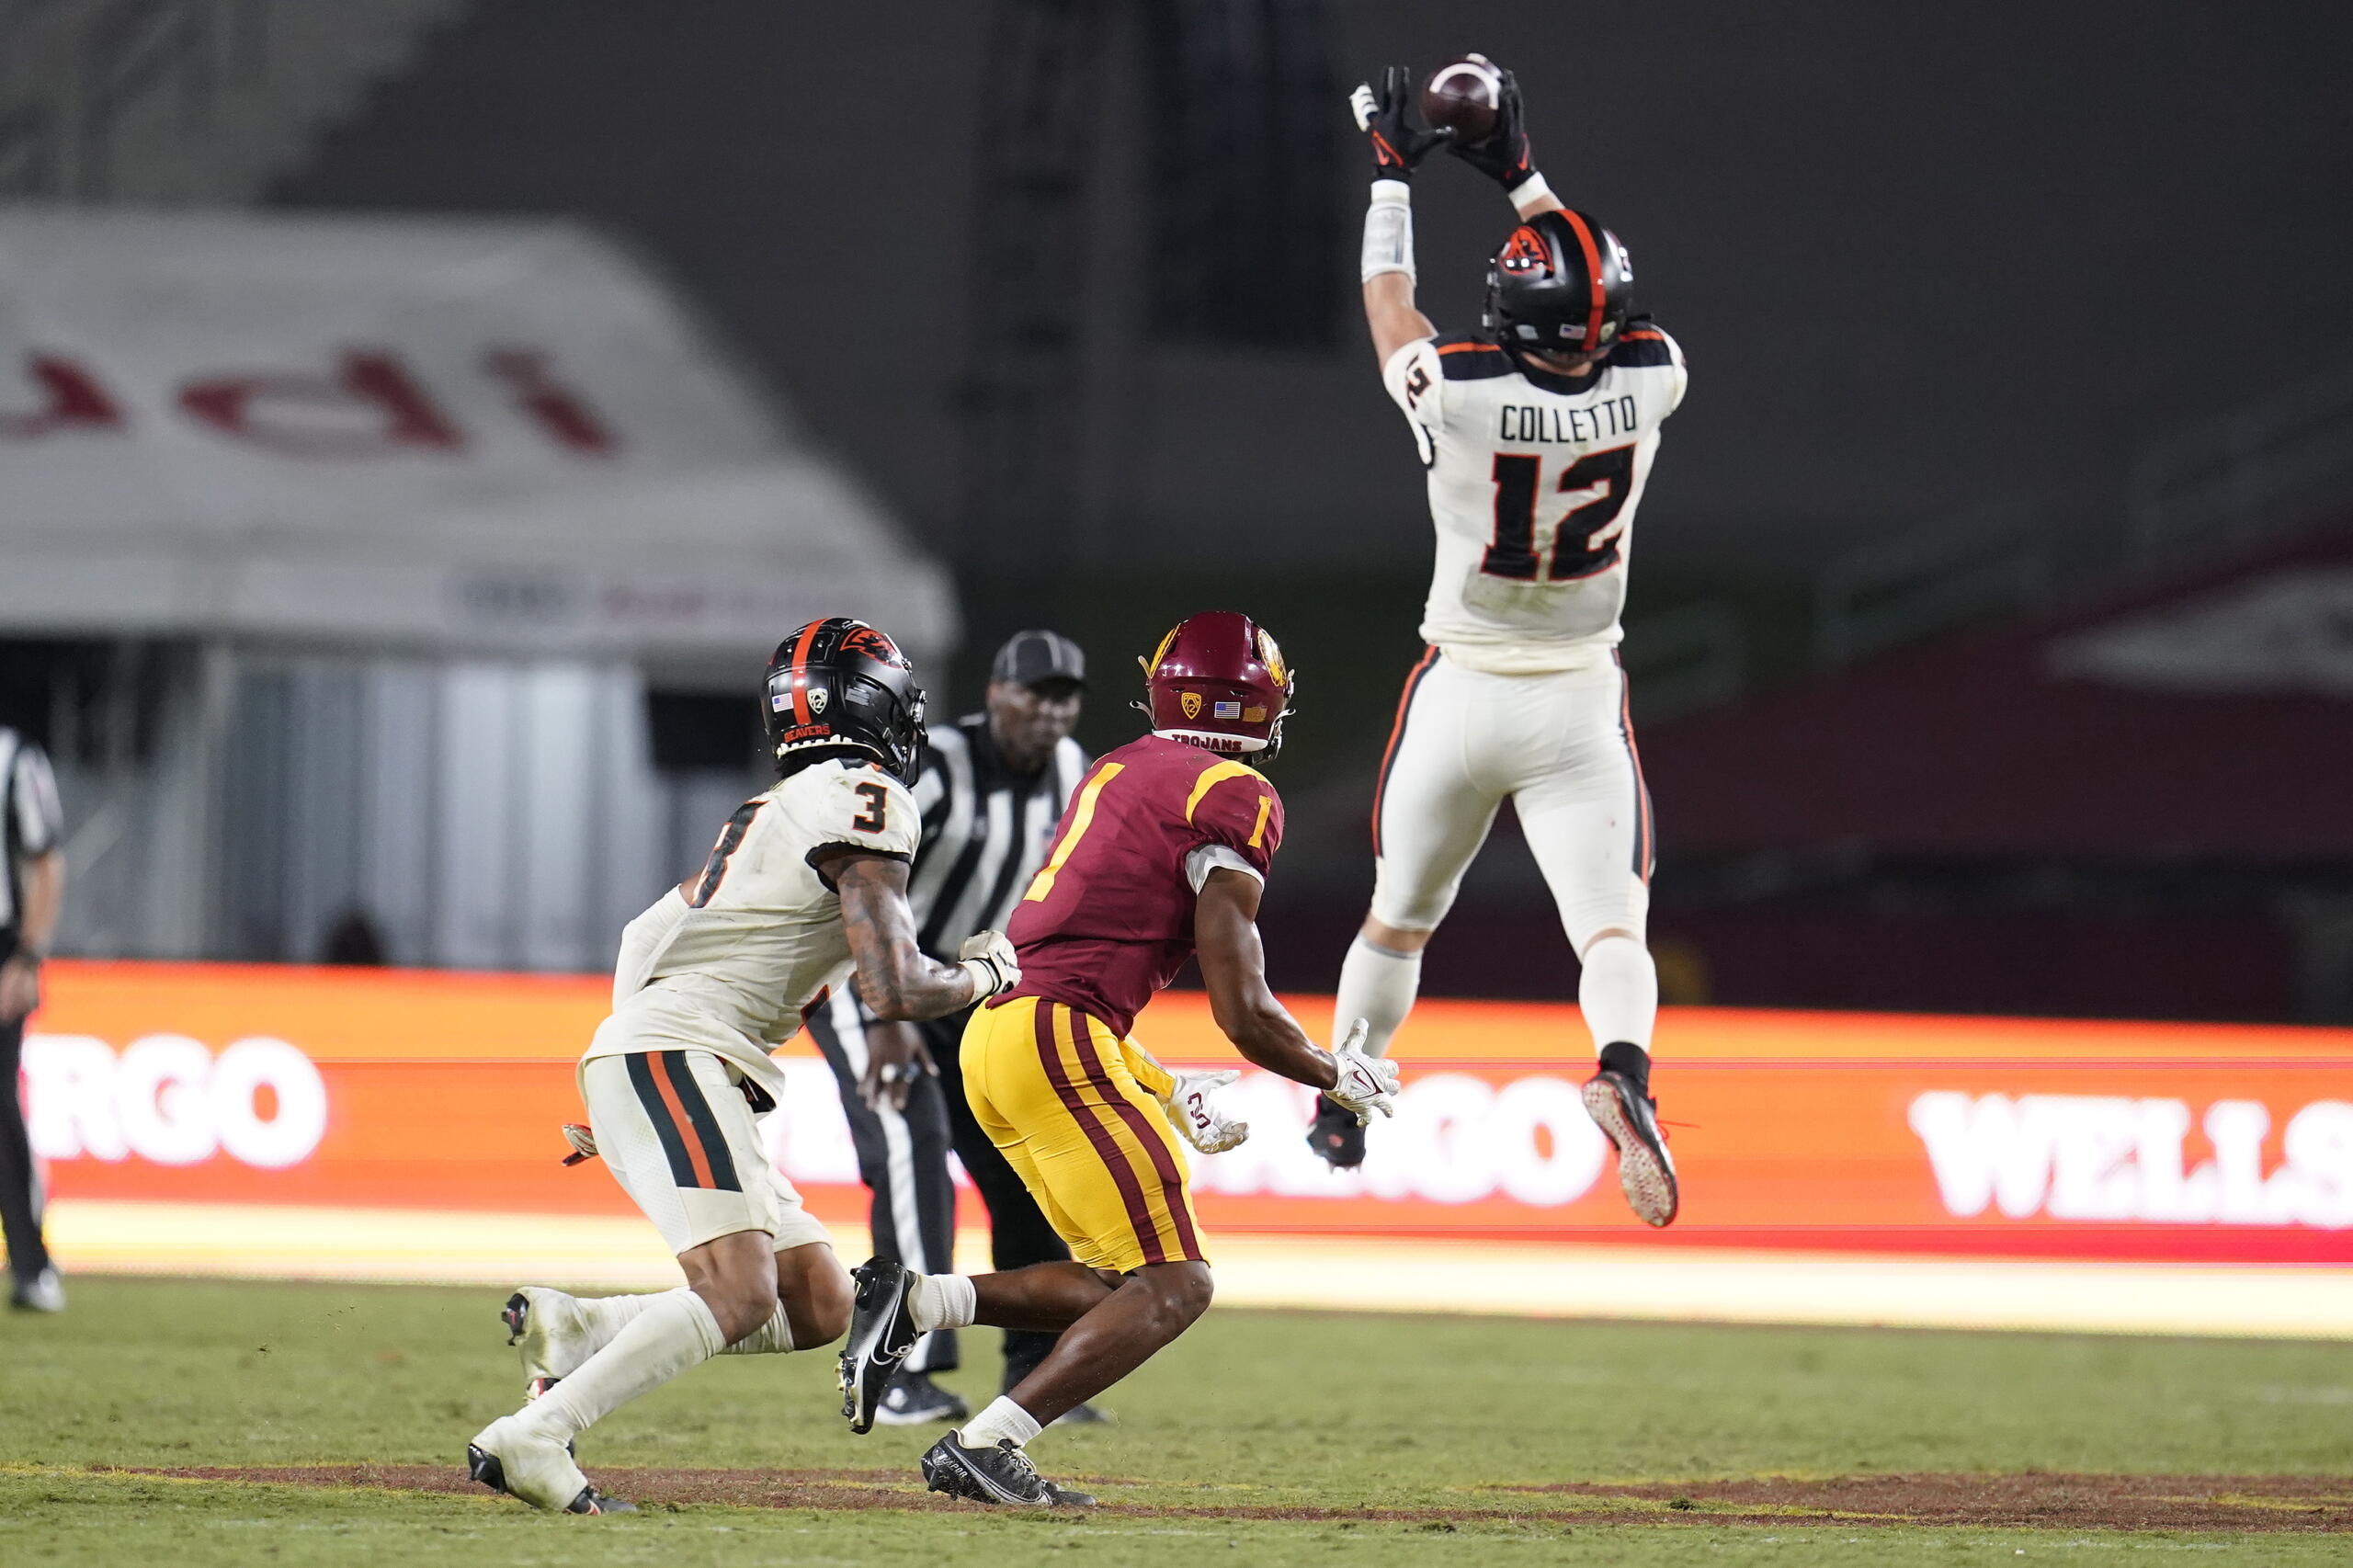 Oregon State linebacker Jack Colletto (12) jumps in front of Southern California wide receiver Gary Bryant Jr. (1) to intercept a pass during the second half of an NCAA college football game Saturday, Sept. 25, 2021, in Los Angeles.